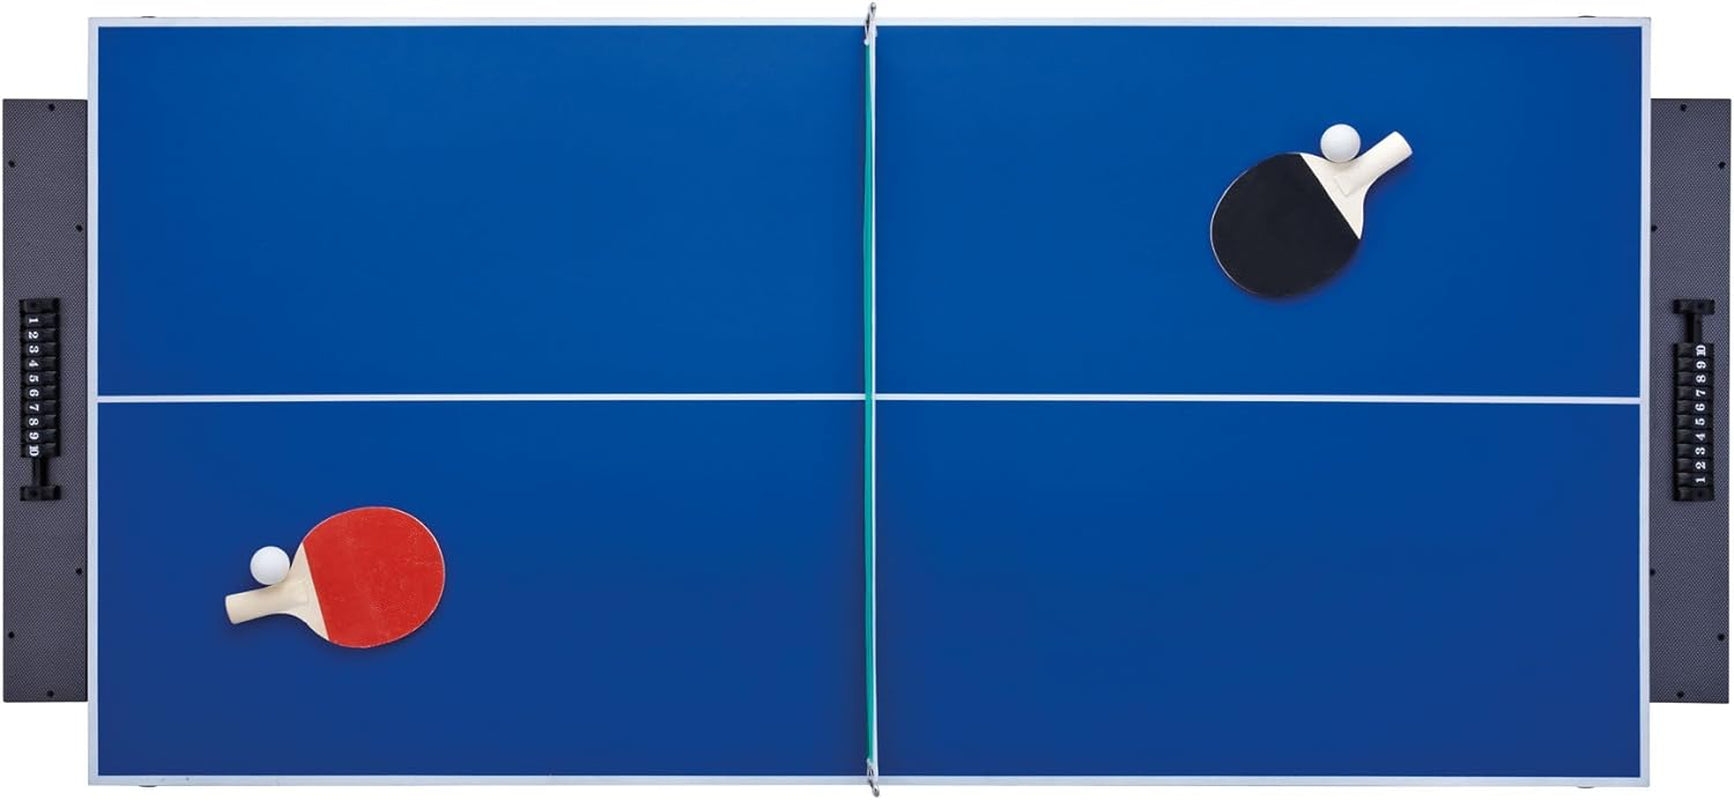 by GLD PRODUCTS Original 3-In-1, 6-Foot Flip Game Table (Air Hockey, Billiards and Table Tennis)